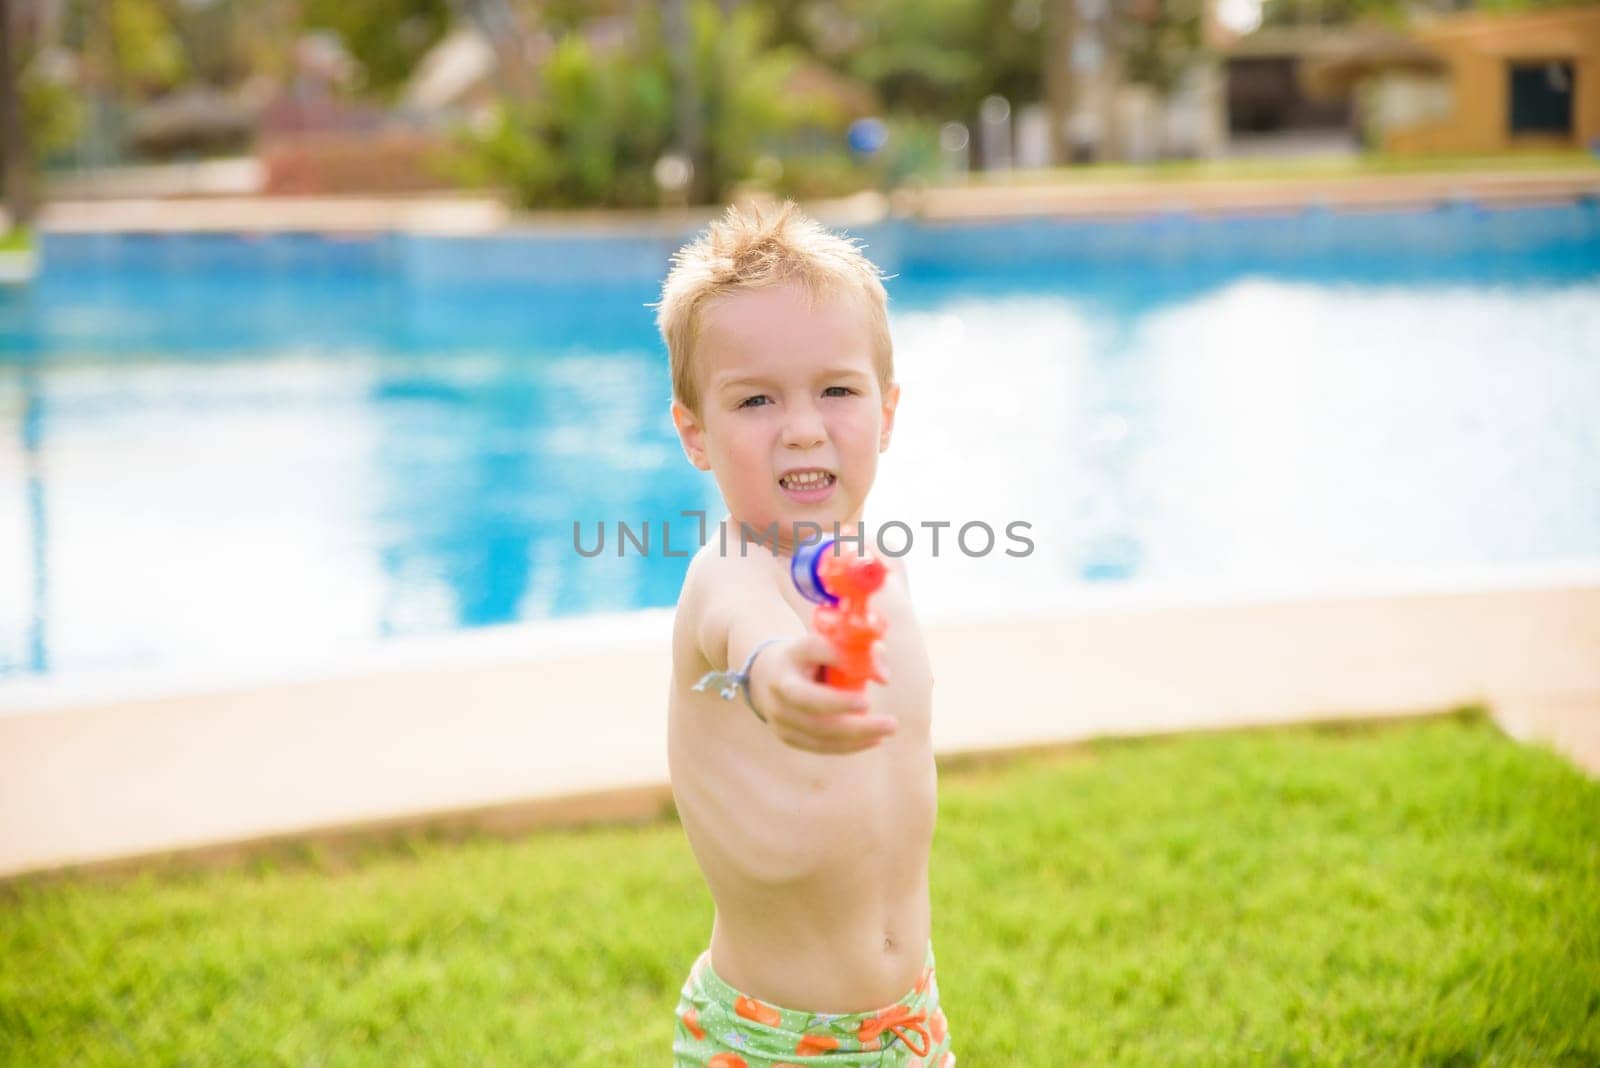 Child playing with water toy in summer.